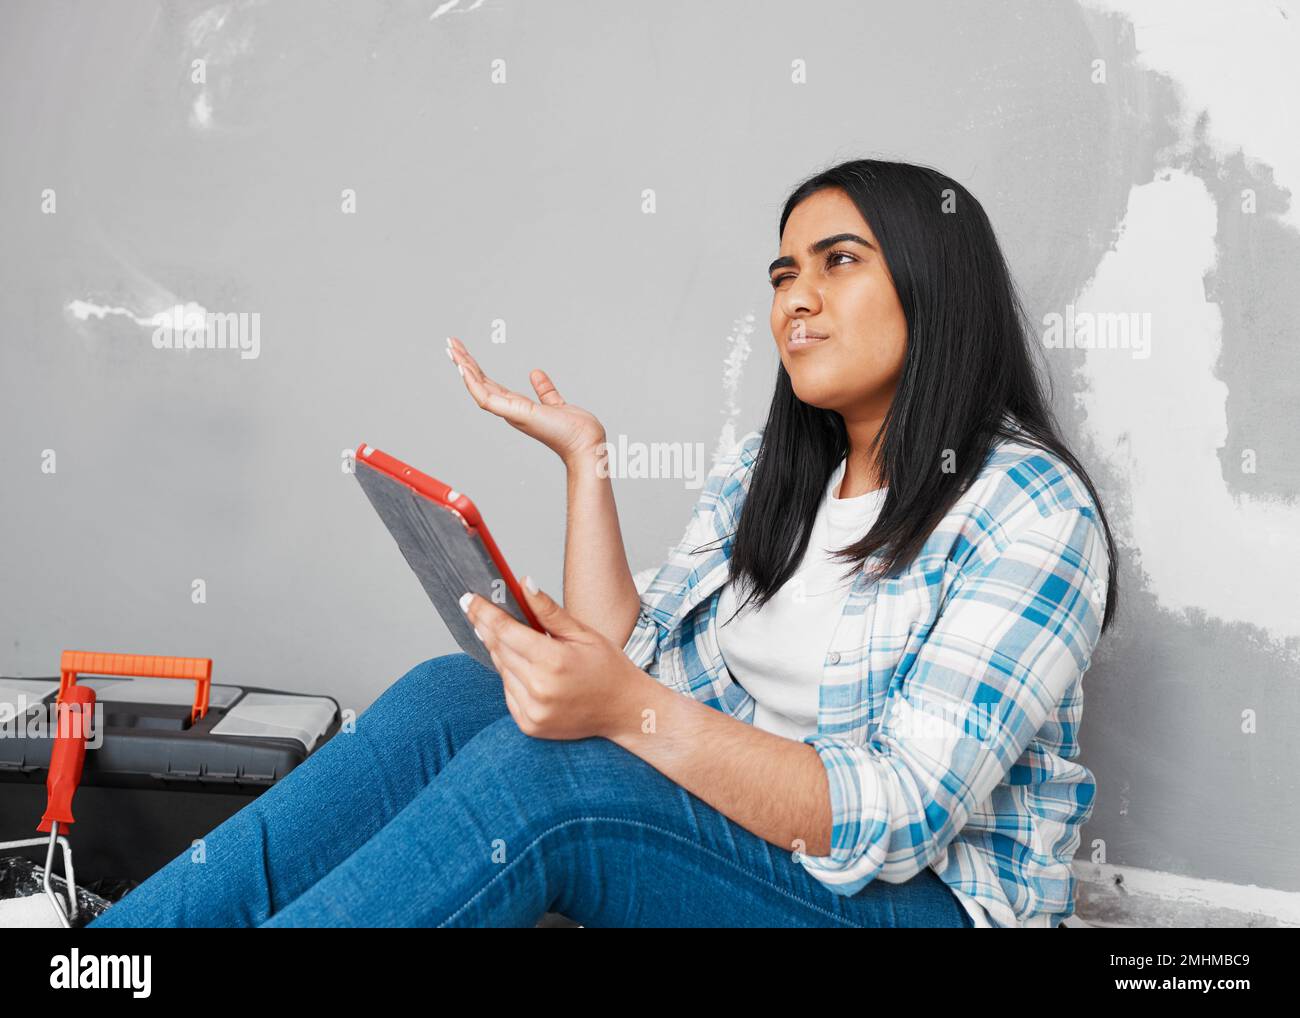 Young Indian woman frustrated, stuck with home DIY project digital how-to guide Stock Photo